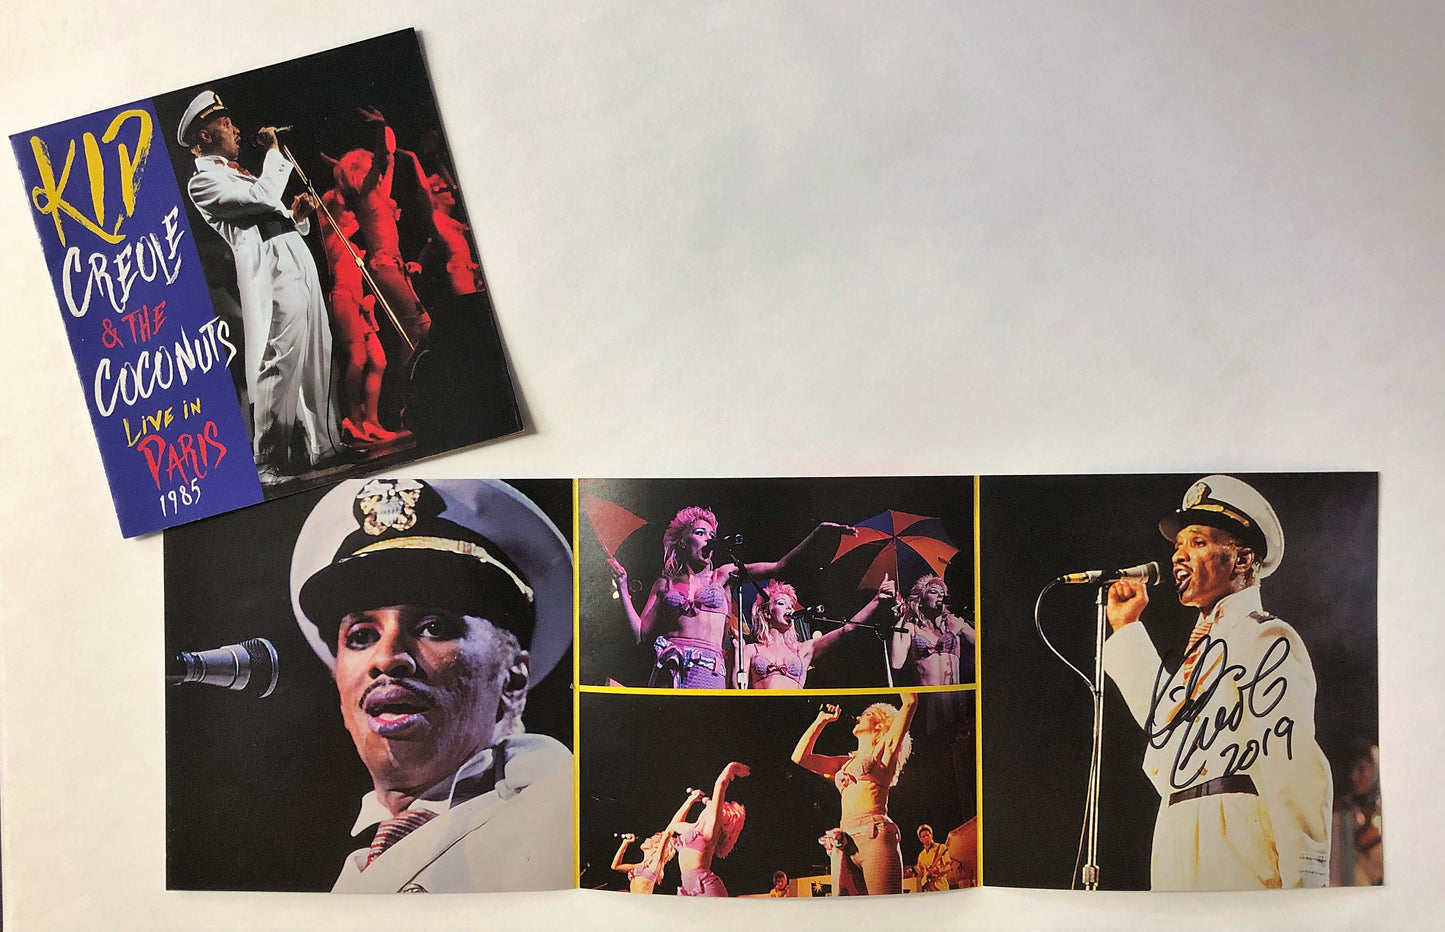 Kid Creole & The Coconuts - Live in Paris 1985 CD